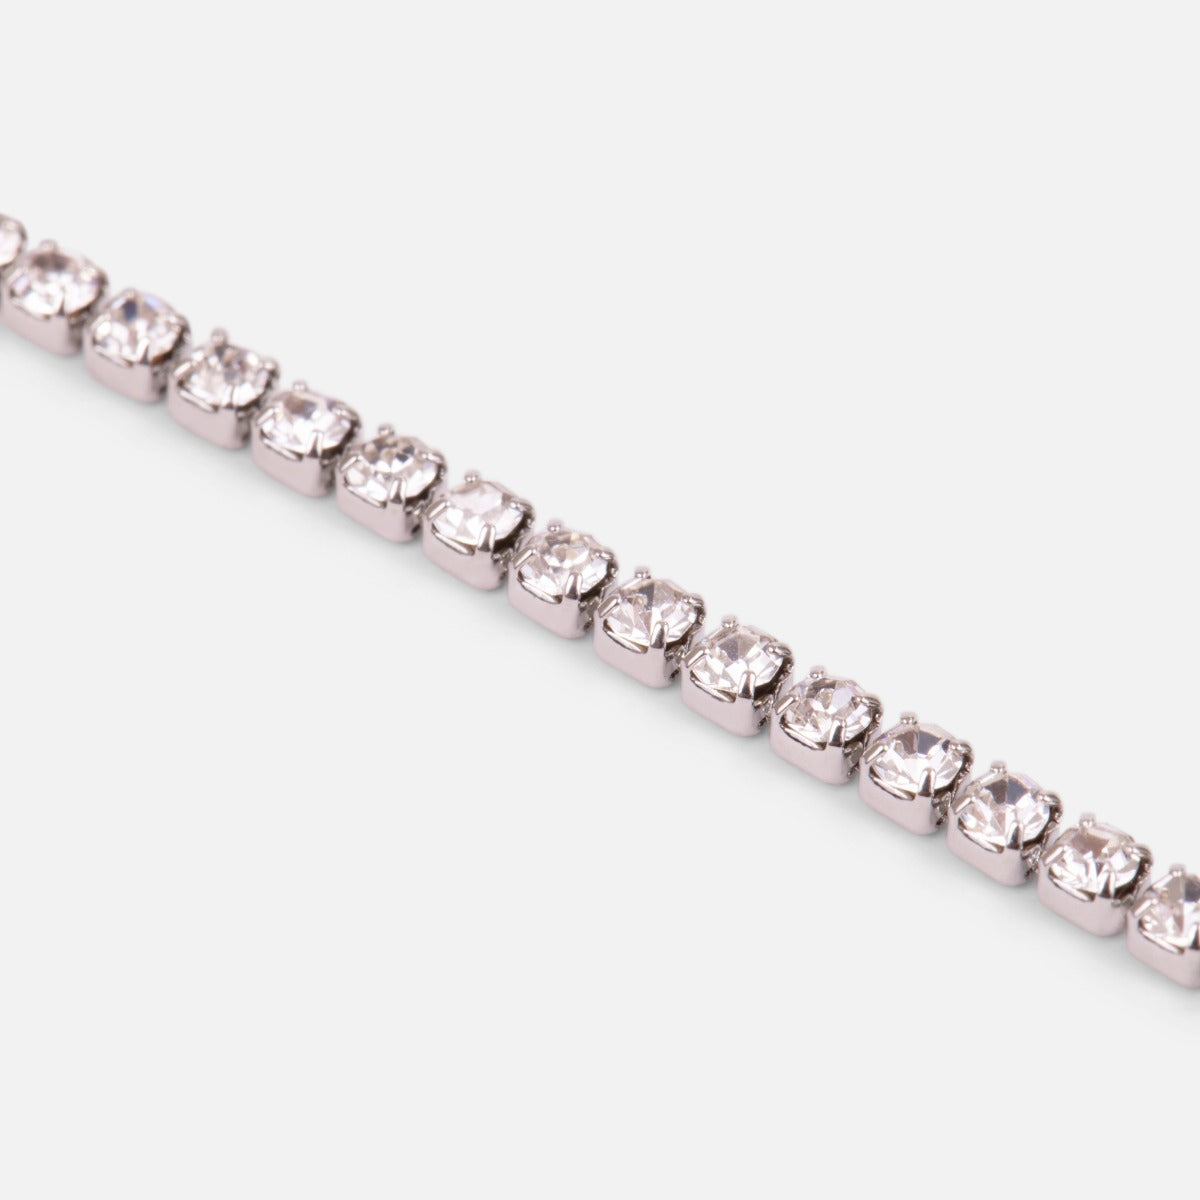 Silvered ankle chain with small sparkling stones